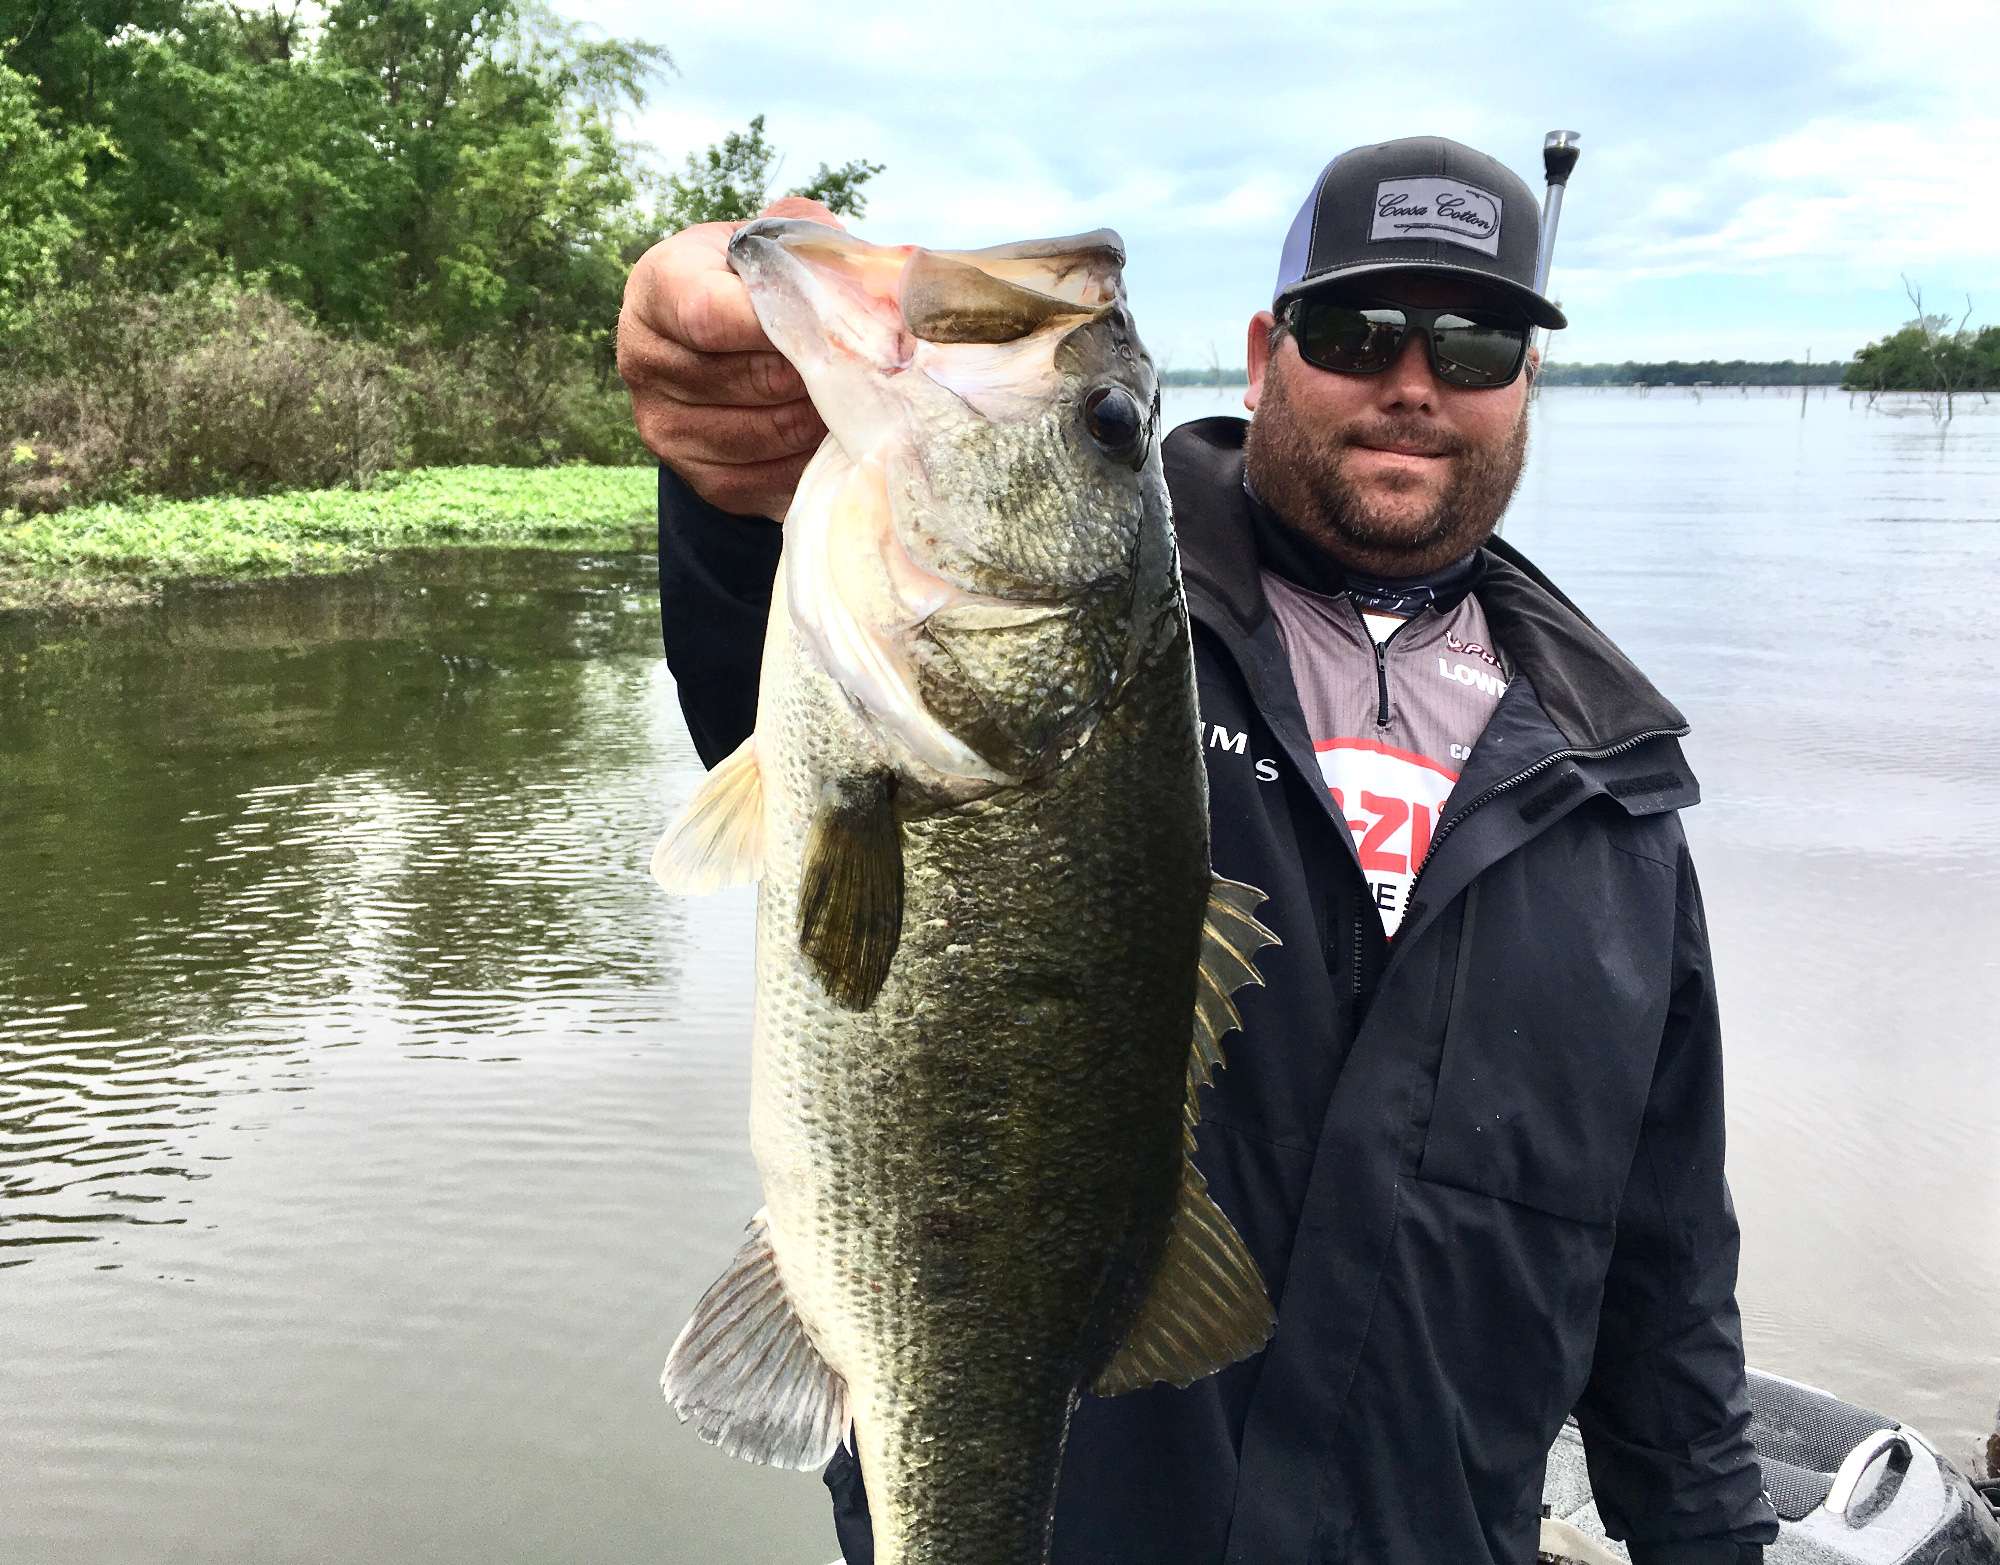 Clent Davis struggled all morning as the shad spawn bite was not cooperating.  After missing almost 10 fish that wouldnât really eat his bait he picked up 2 keepers. His persistence with a swim jig paid off with this nice 6-11 that brought a smile to his face.